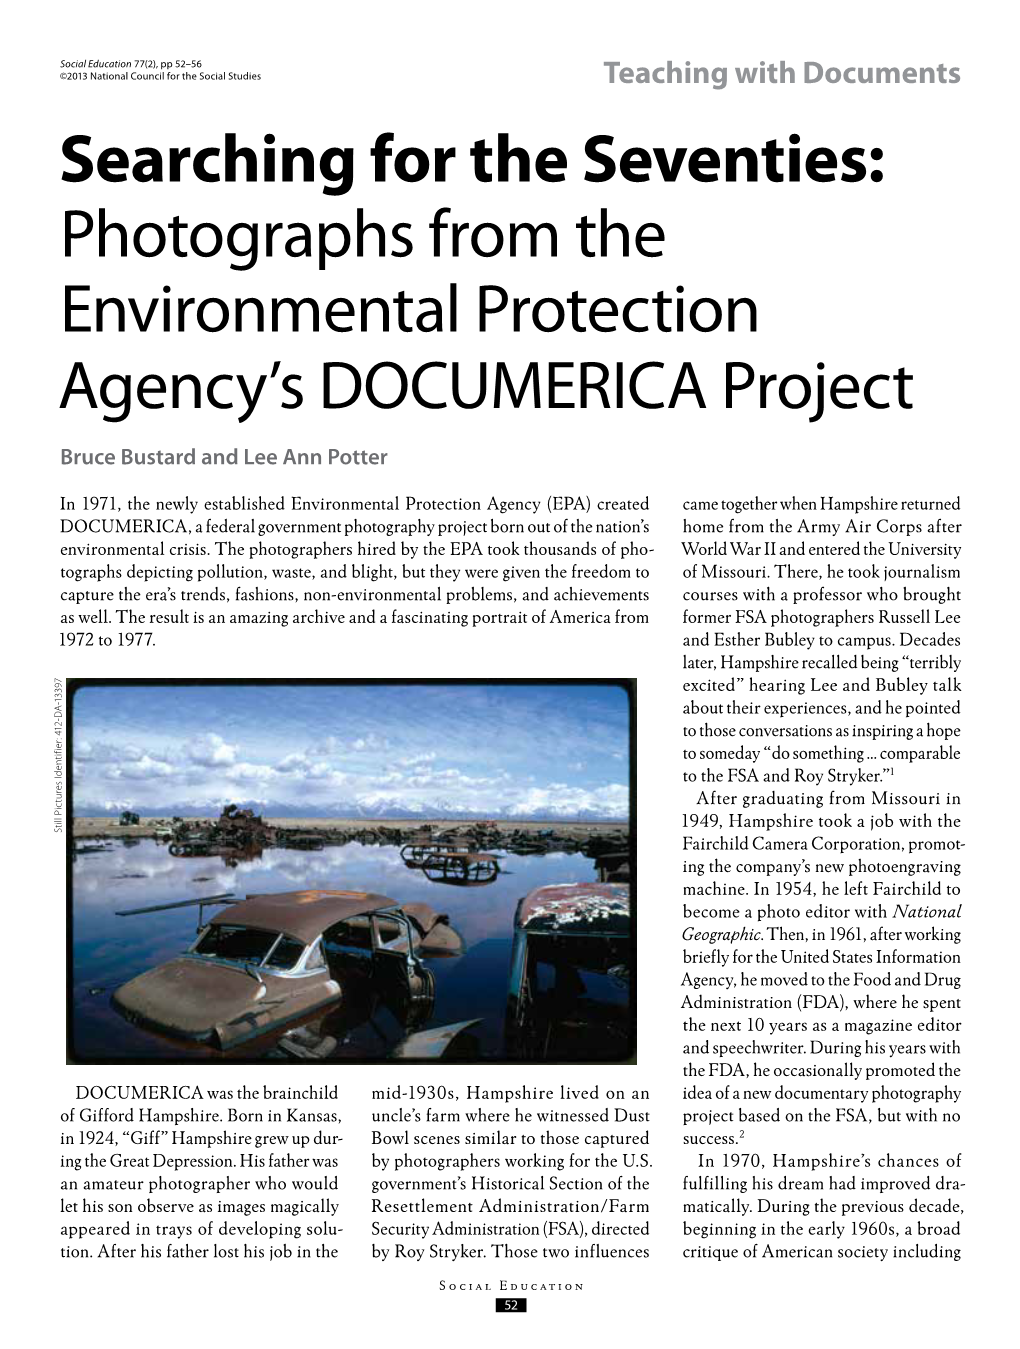 Photographs from the Environmental Protection Agency's DOCUMERICA